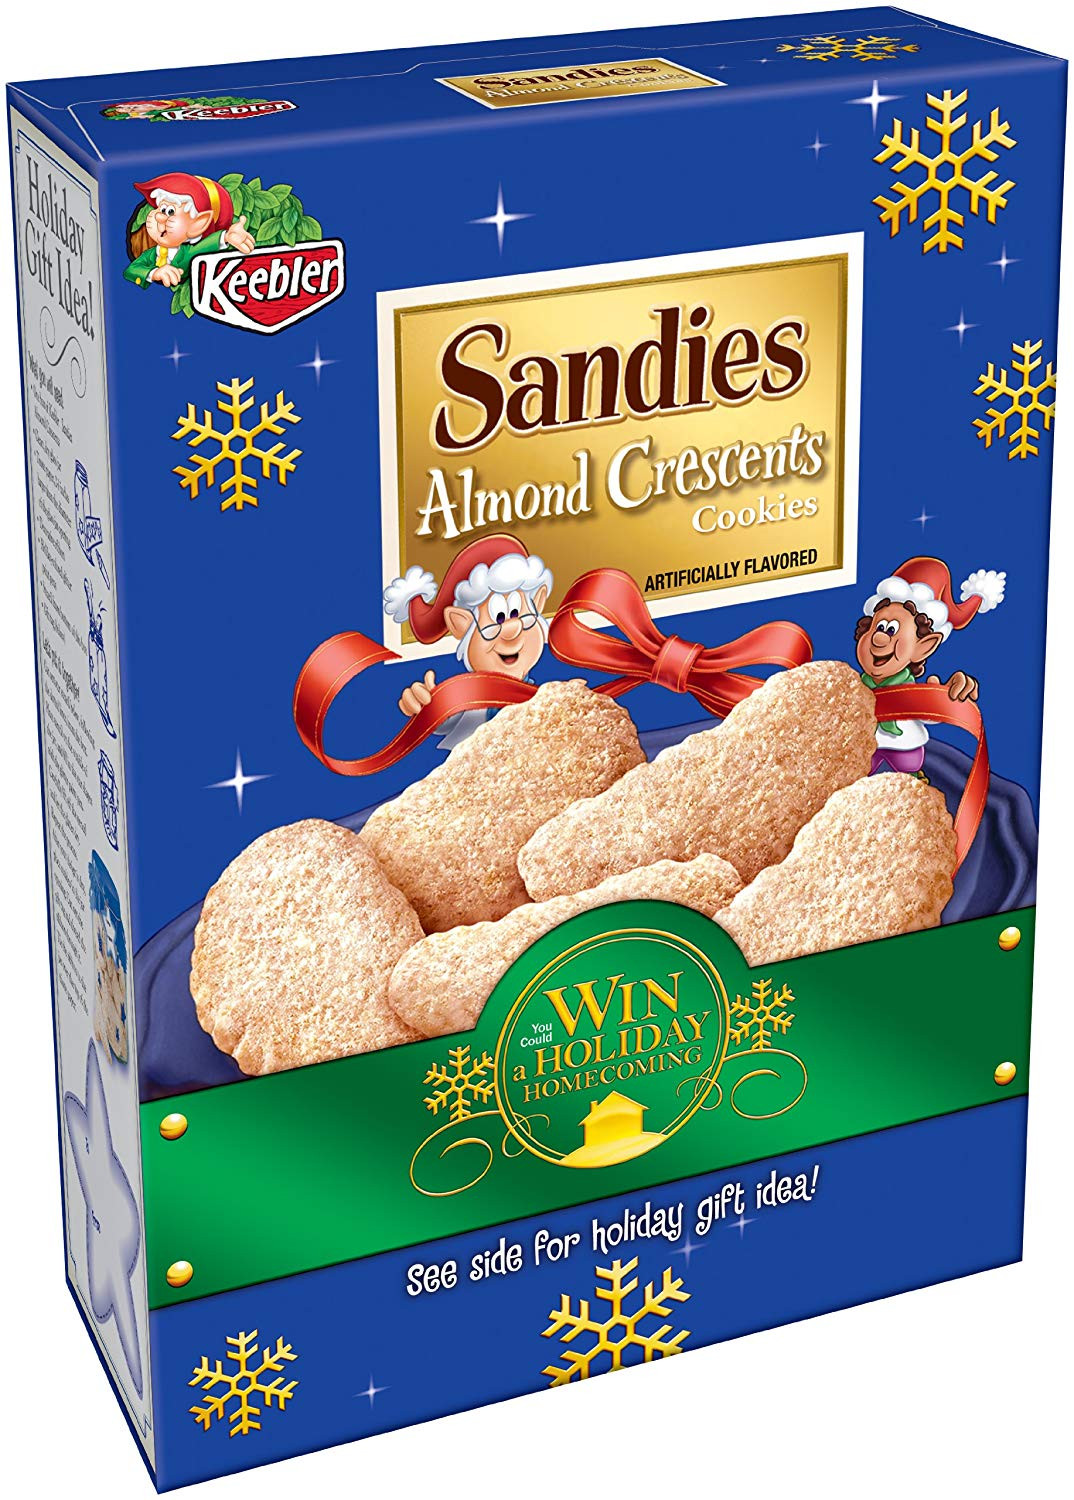 21 Best Ideas Keebler Christmas Cookies Most Popular Ideas of All Time